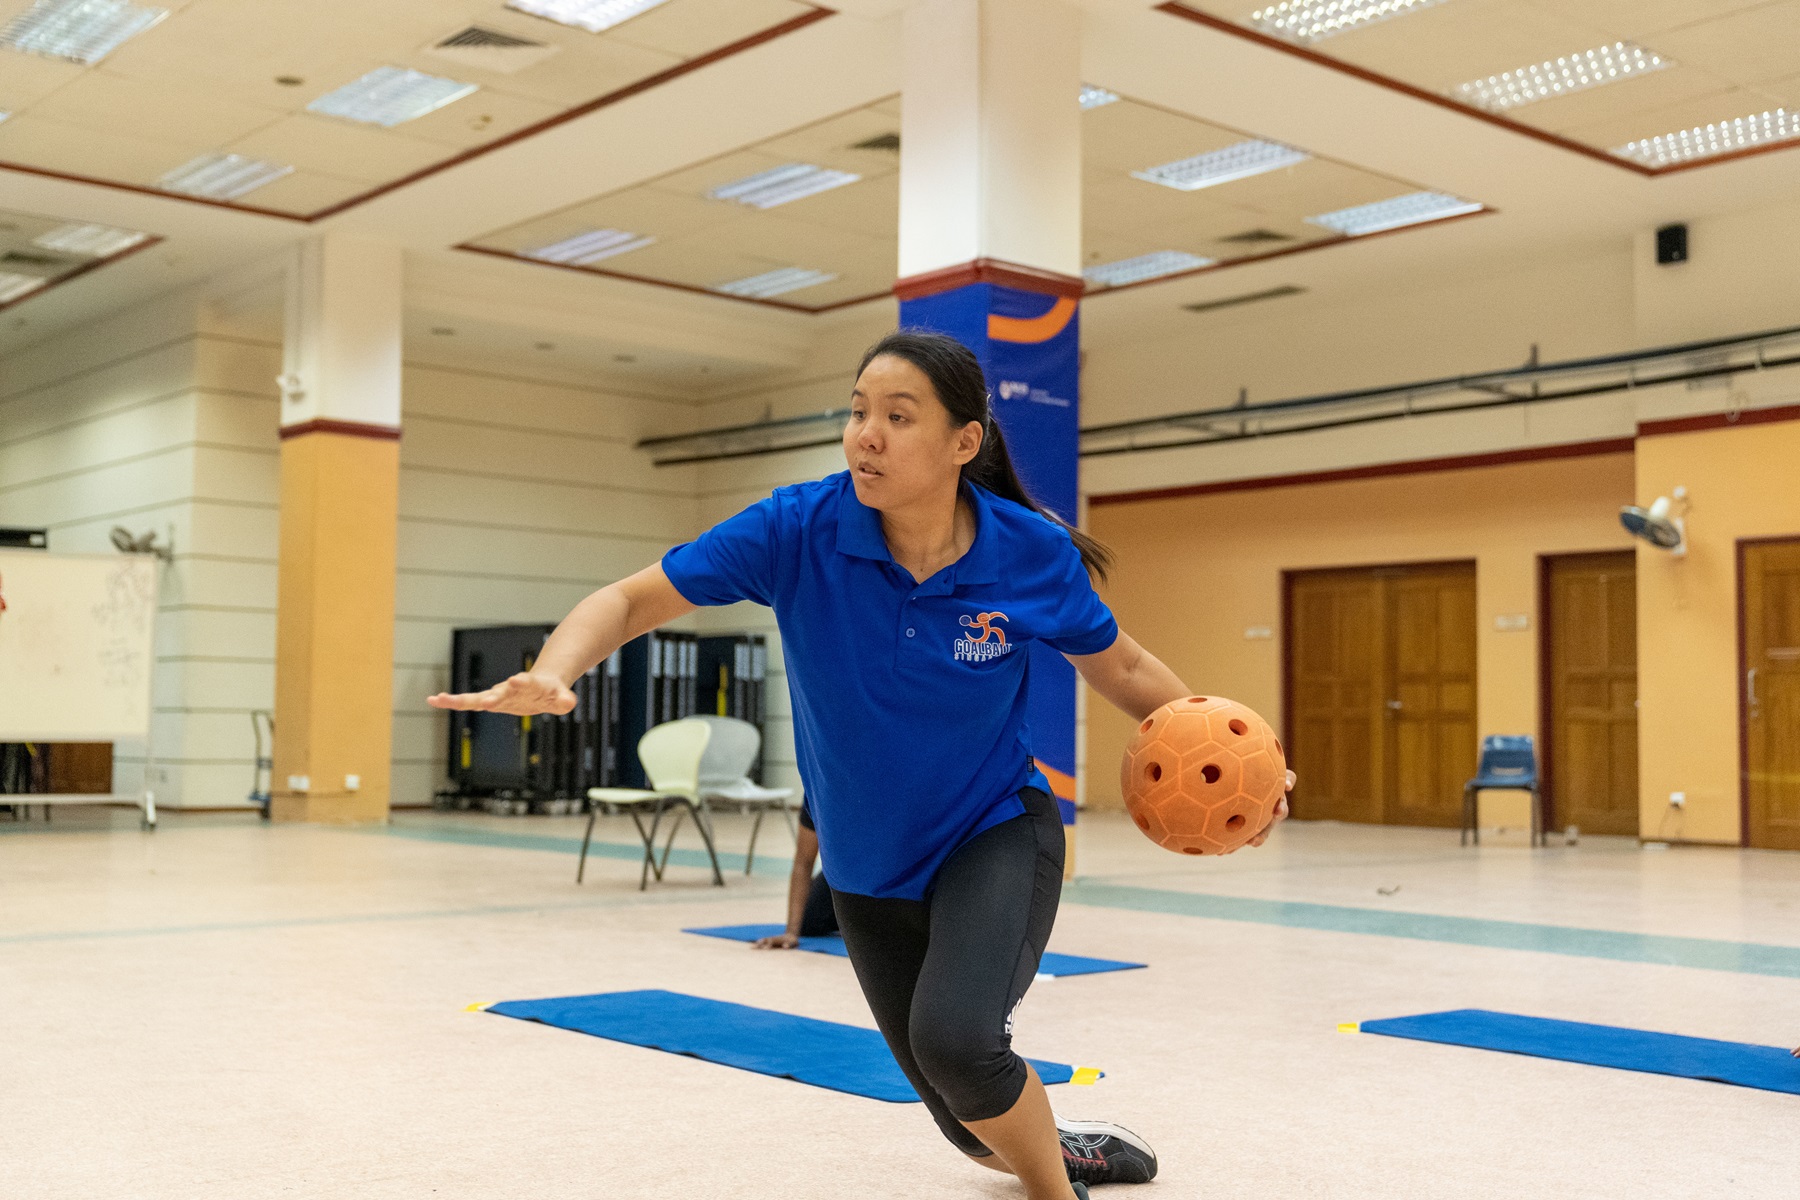 Joan Hung, a national goalball athlete, demonstrated the sport to participants at Sports Spectra. 